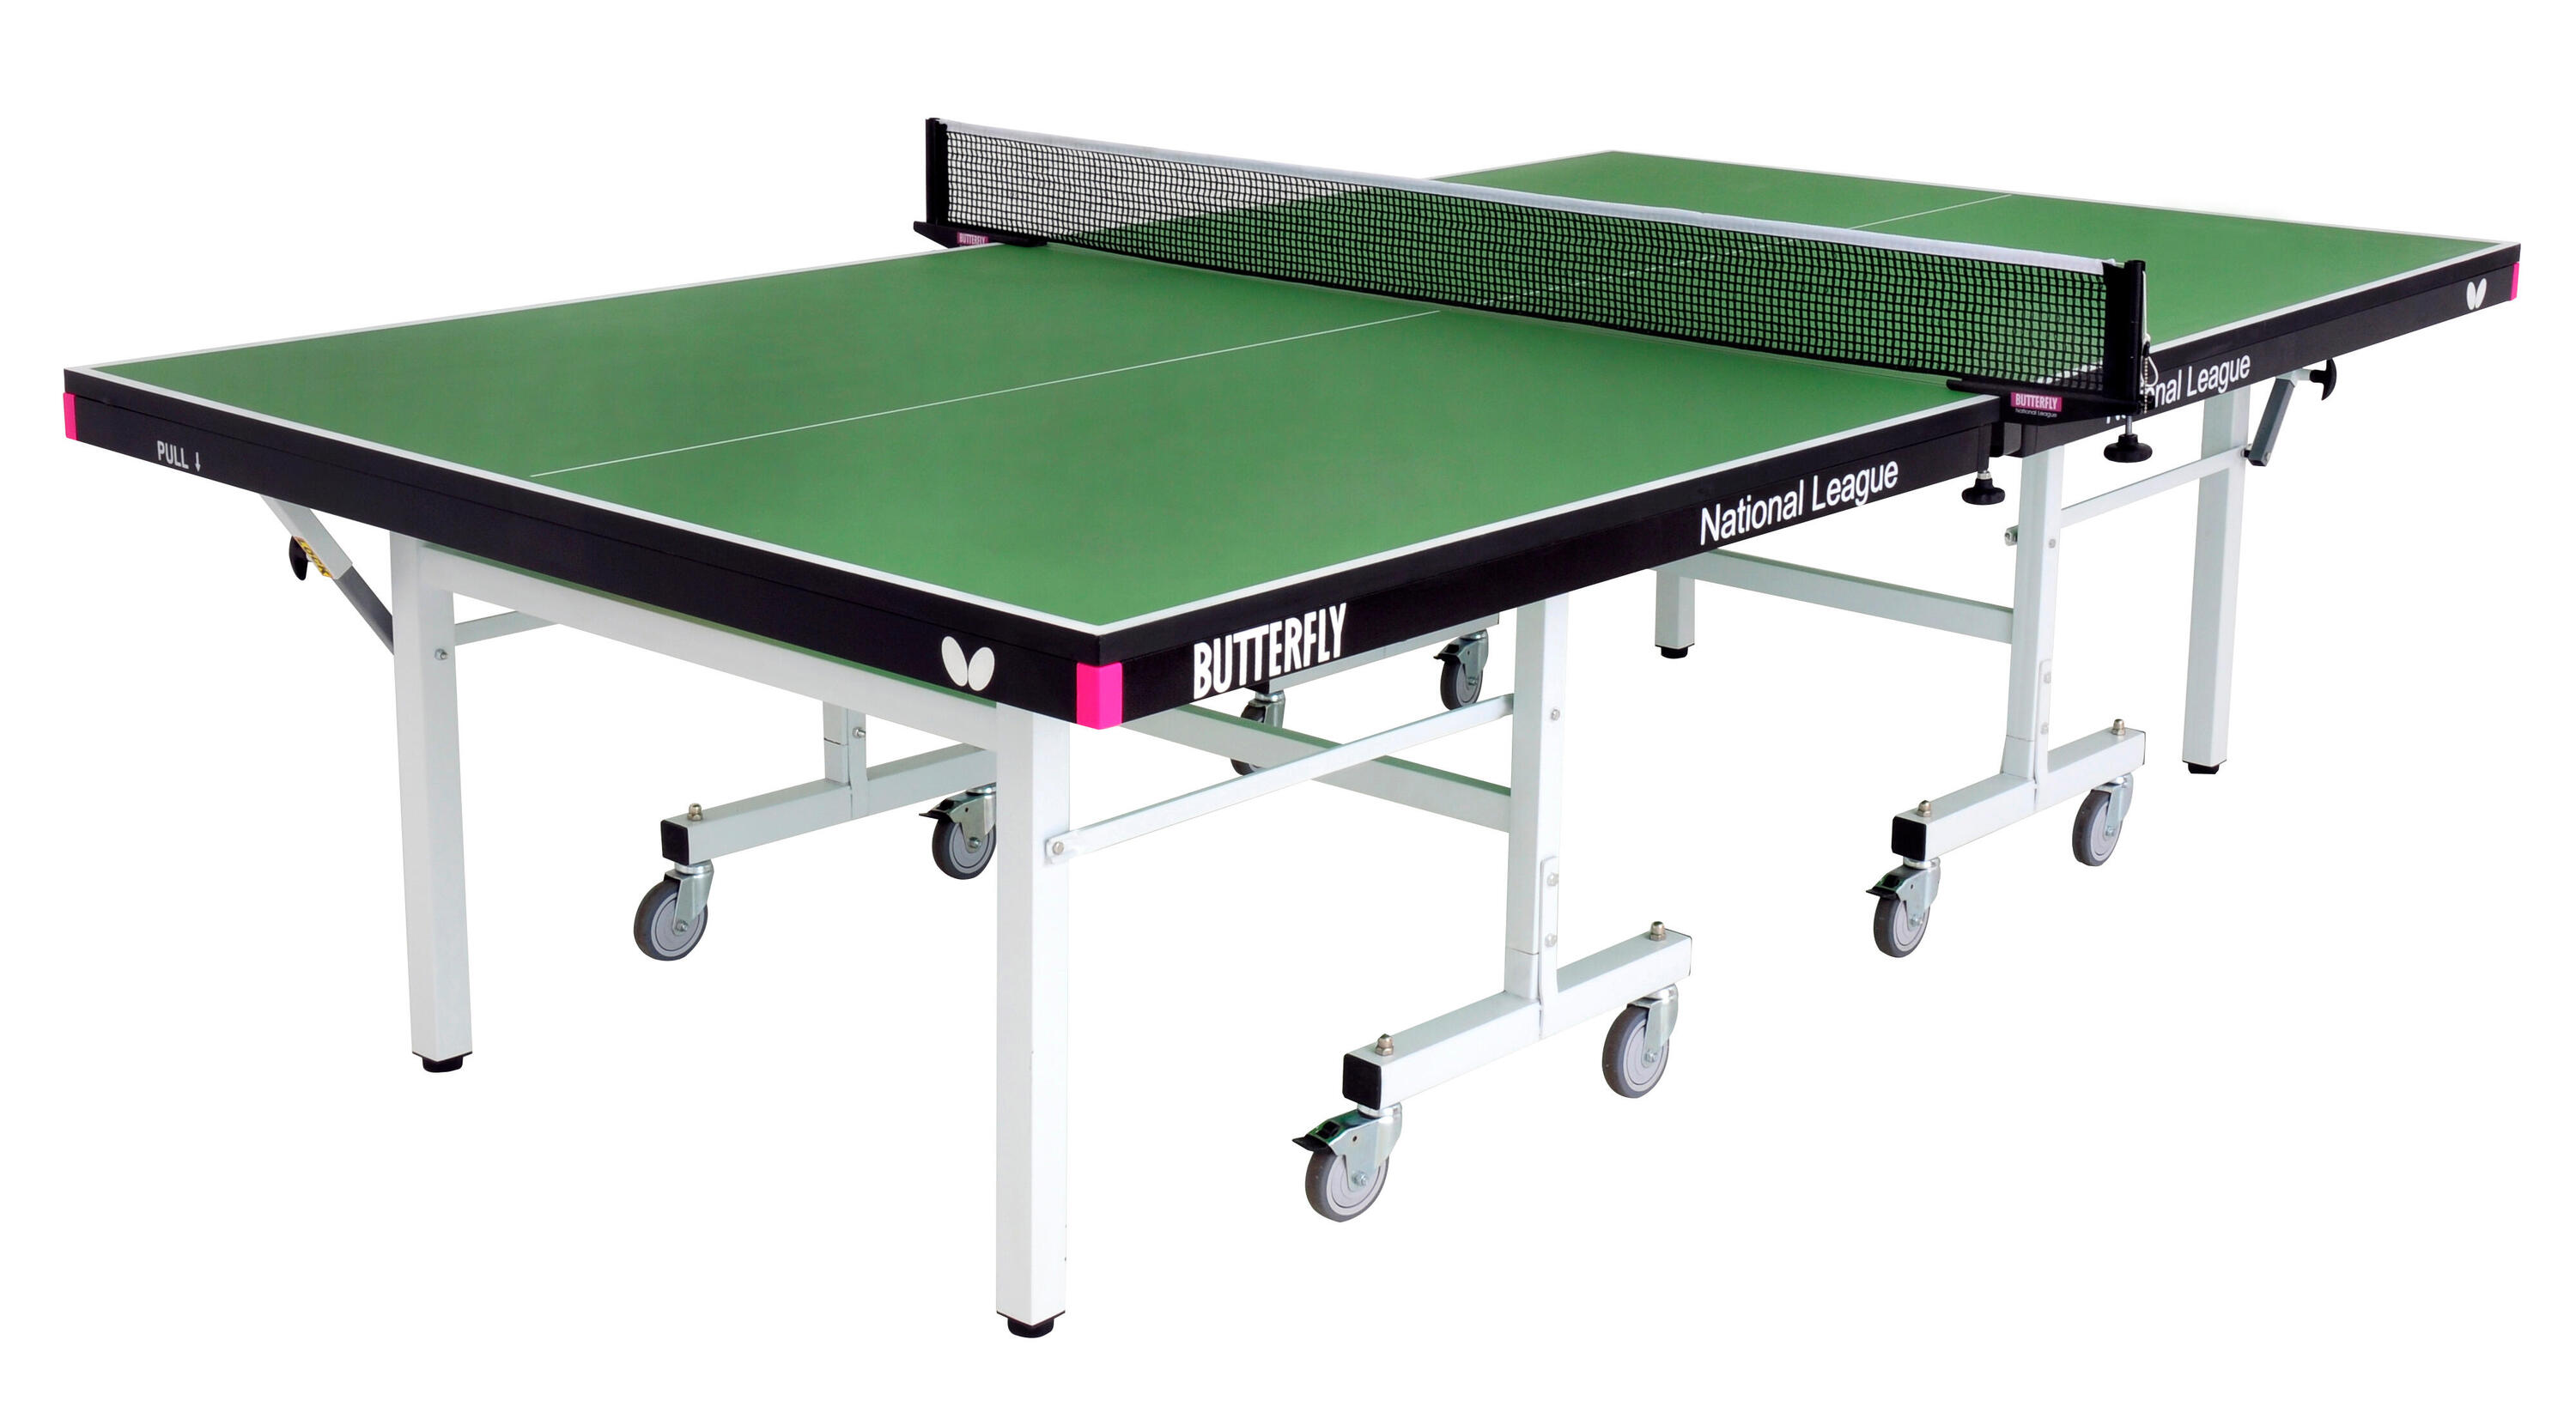 BUTTERFLY Butterfly National League 25 Table Tennis Table